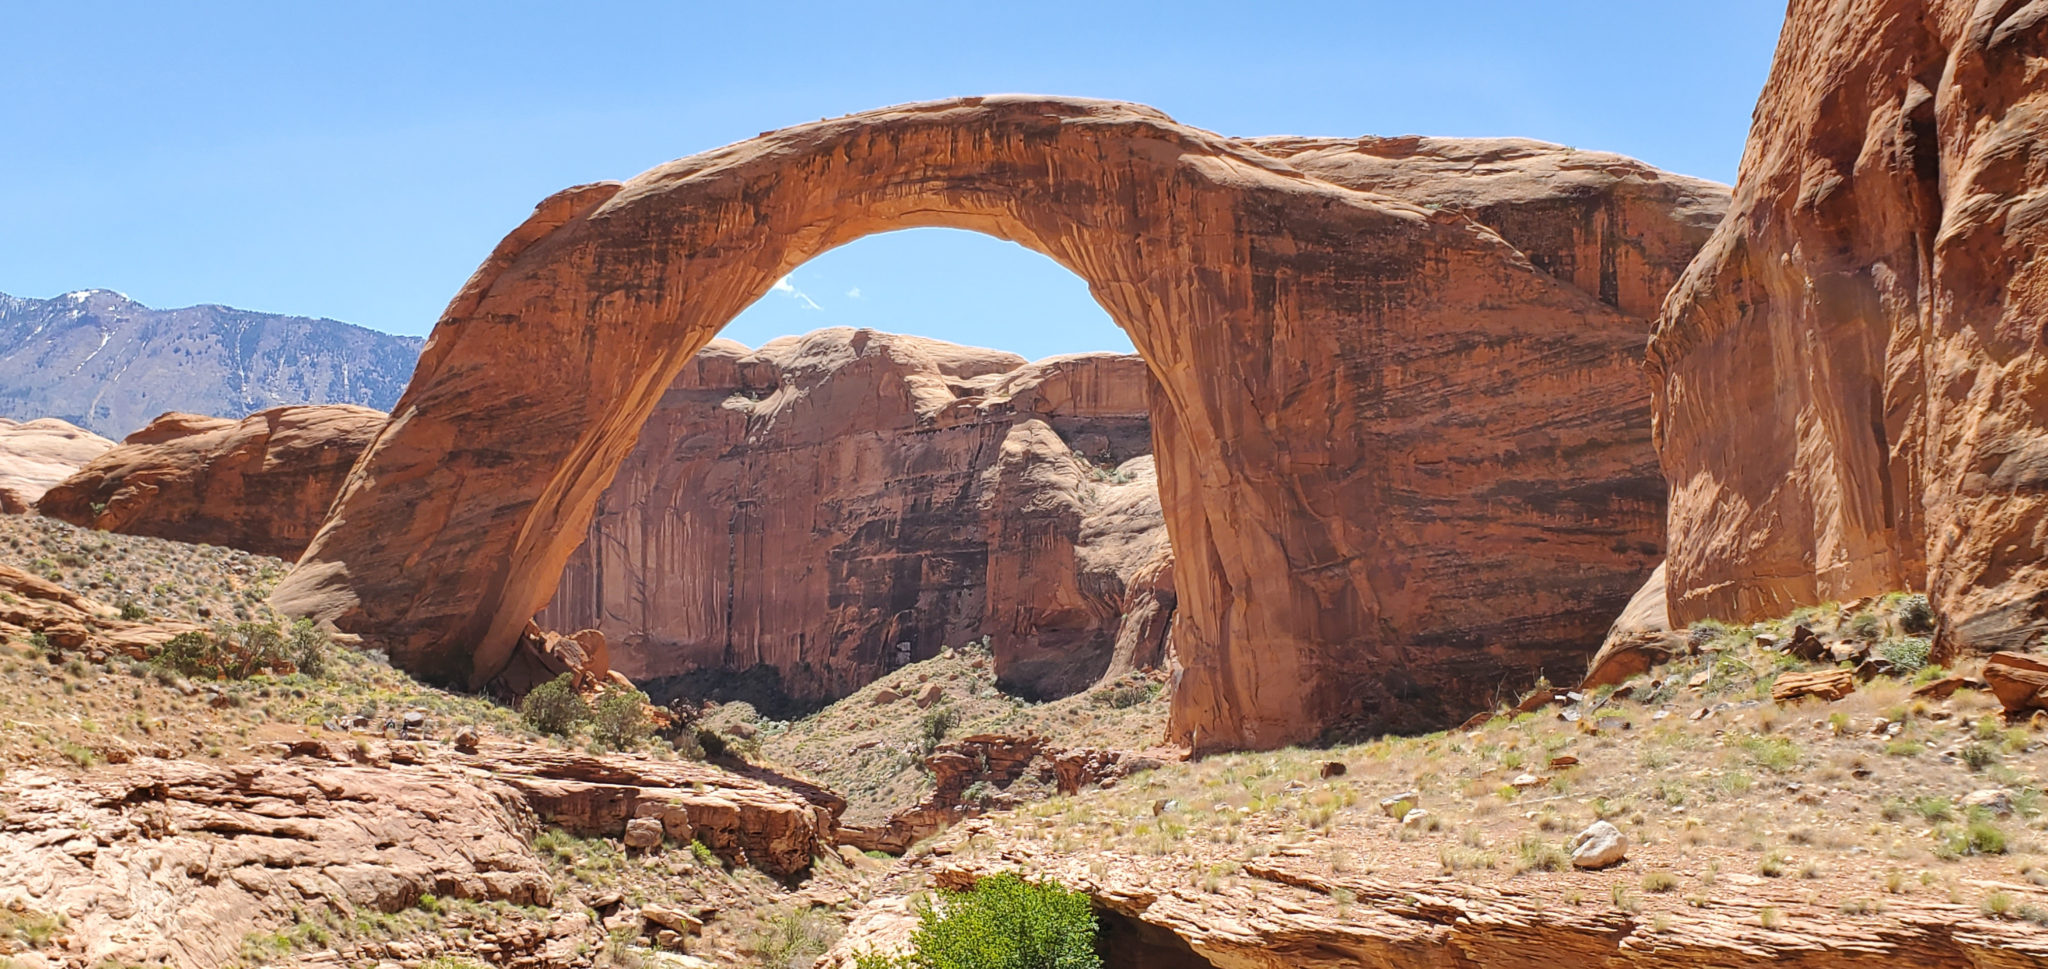 Rainbow Bridge National Monument was stunning. Photos don't do this reverent place justice. The natural bridge is massive and shows the power of nature!